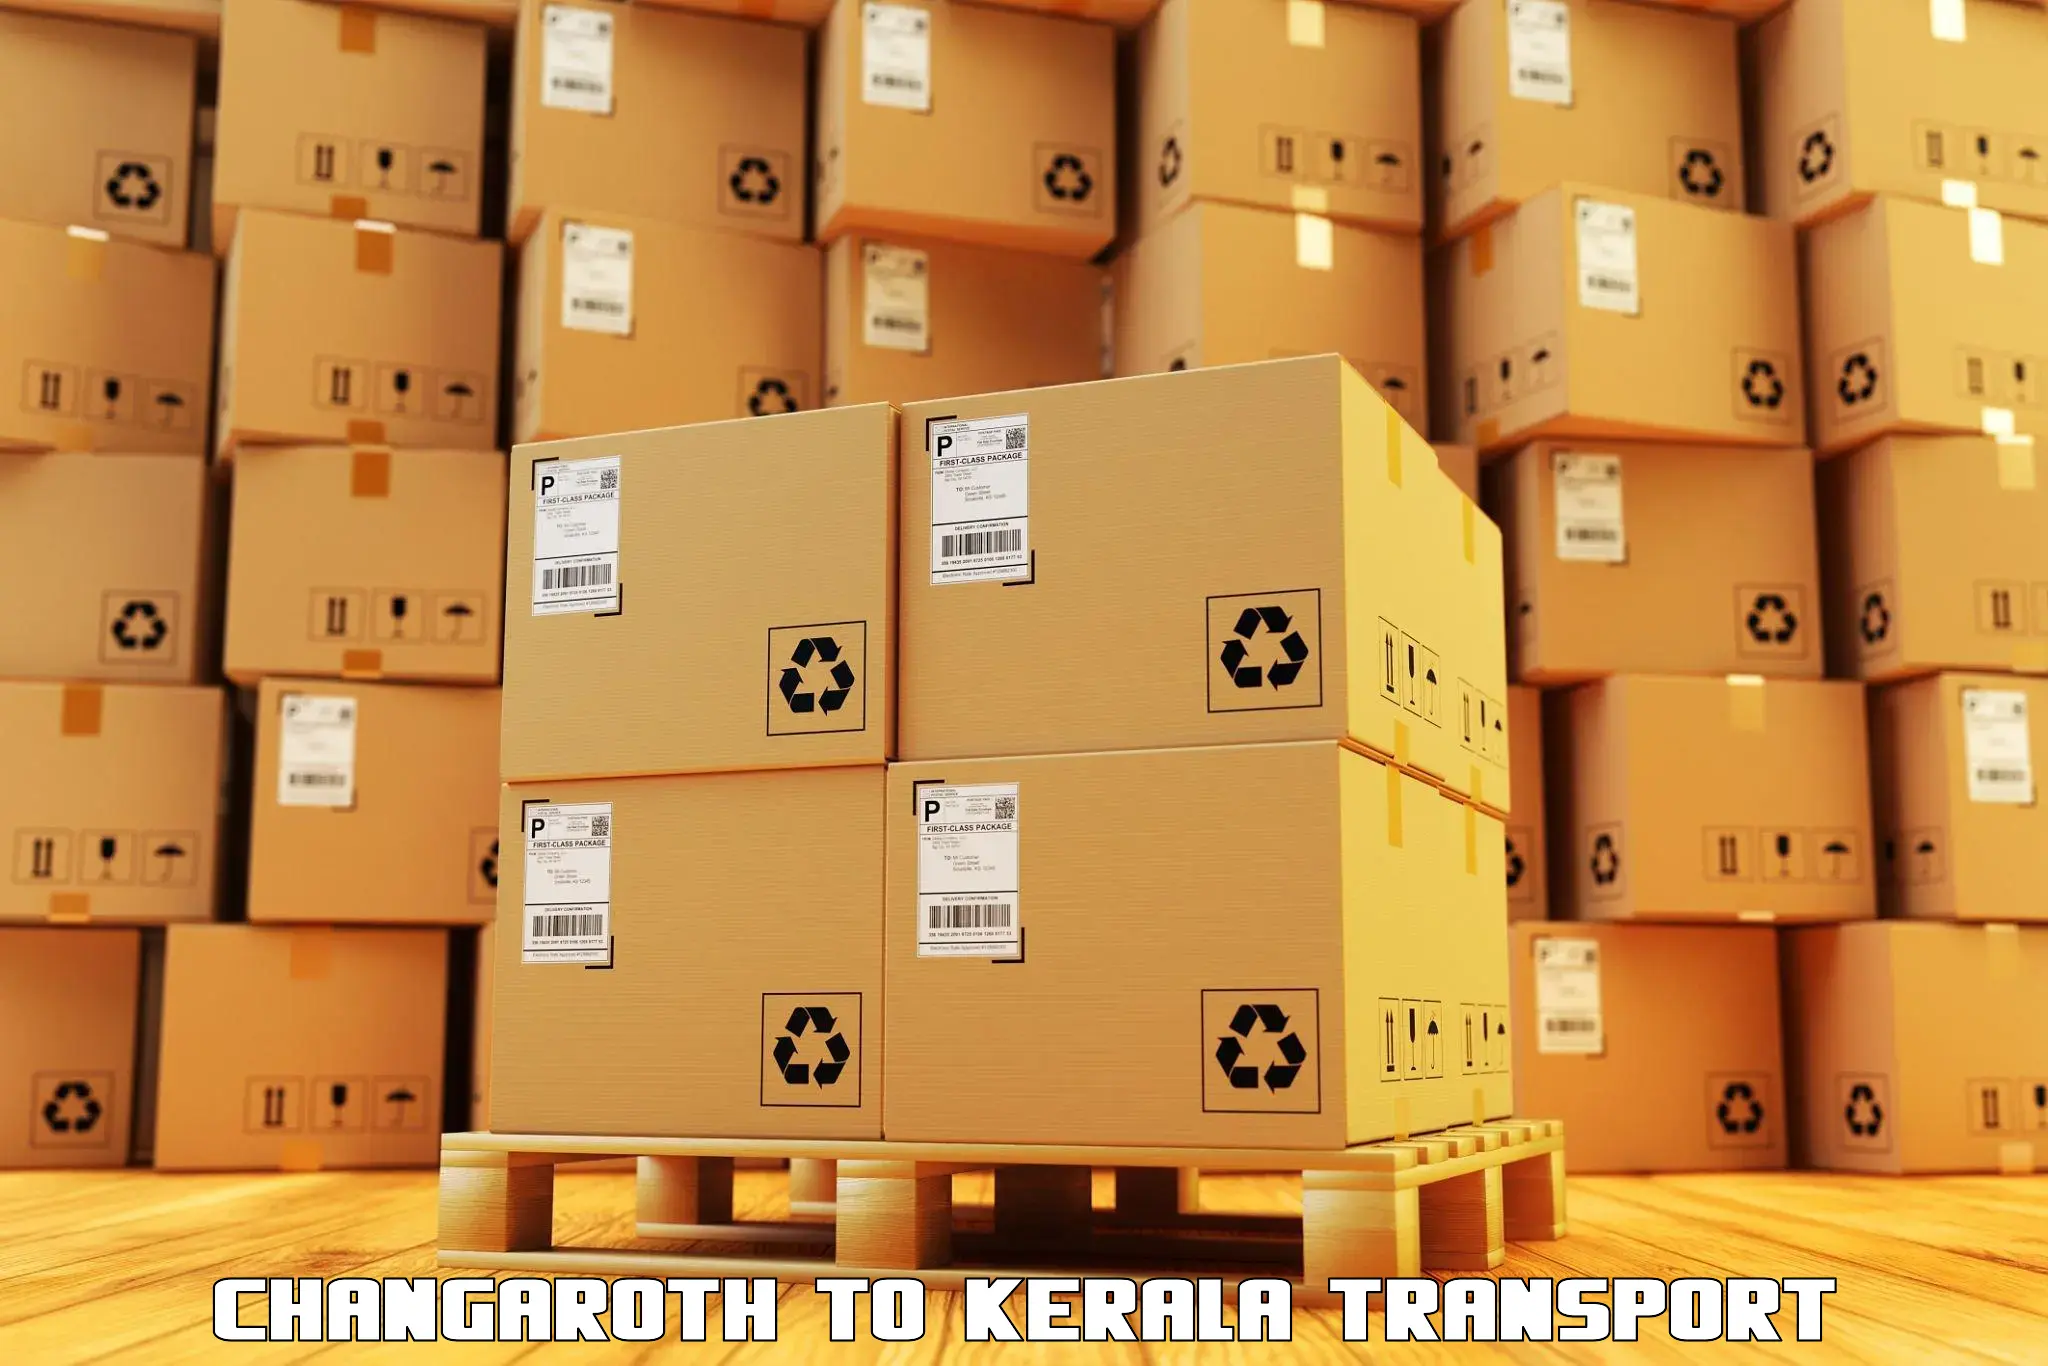 Truck transport companies in India Changaroth to Puthukkad